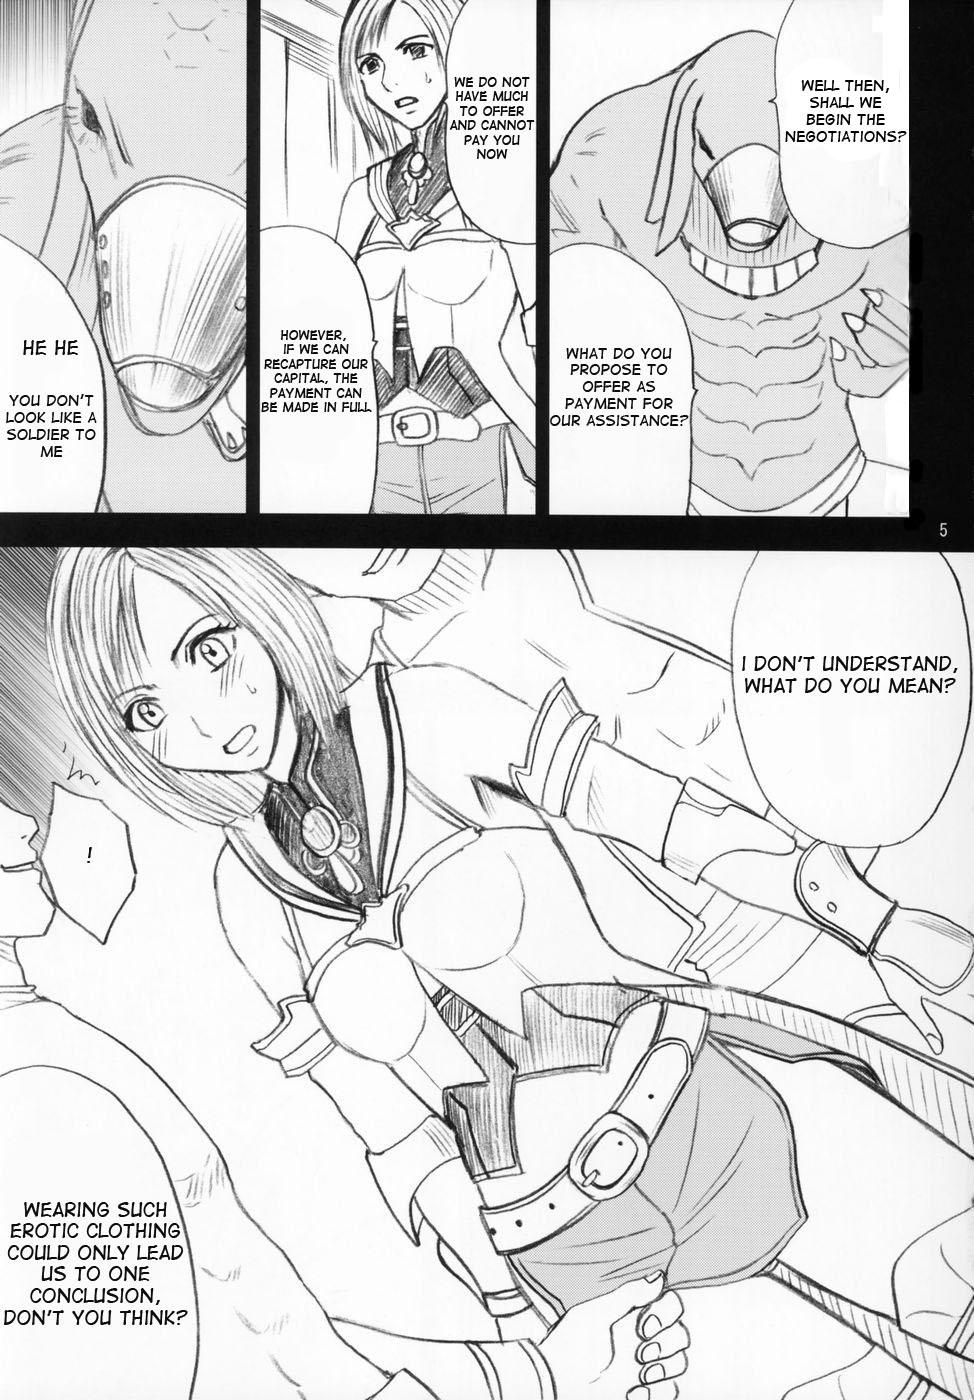 Latino Revenge Or Freedom - Final fantasy xii Nudity - Page 6